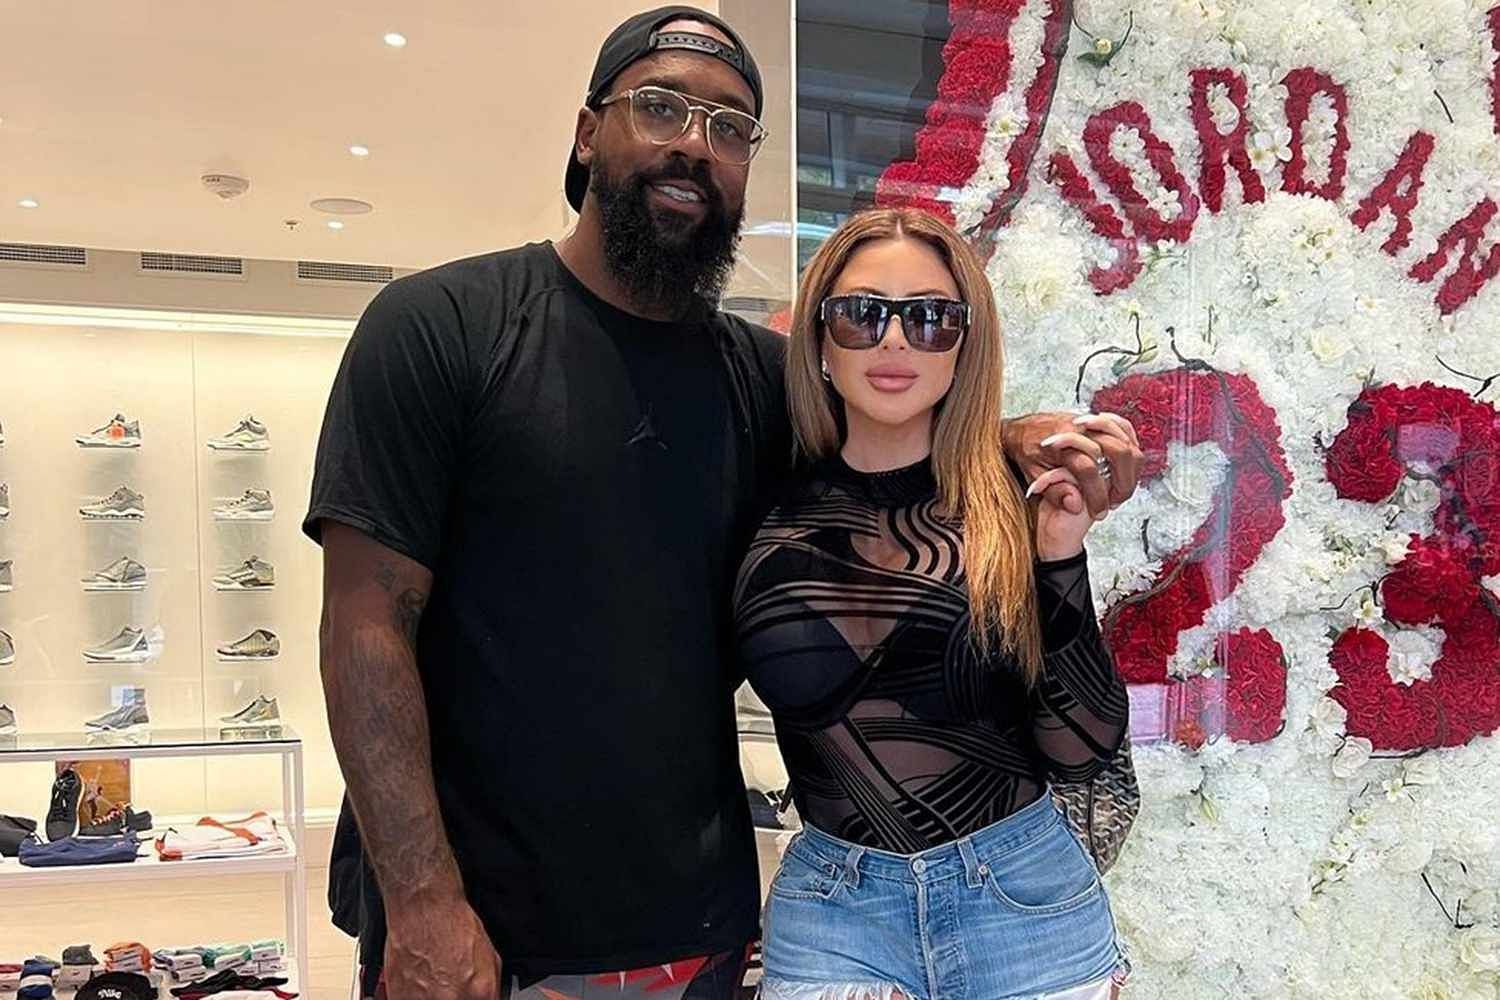 Larsa Pippen and Marcus Jordan are in a relationship since January 2023